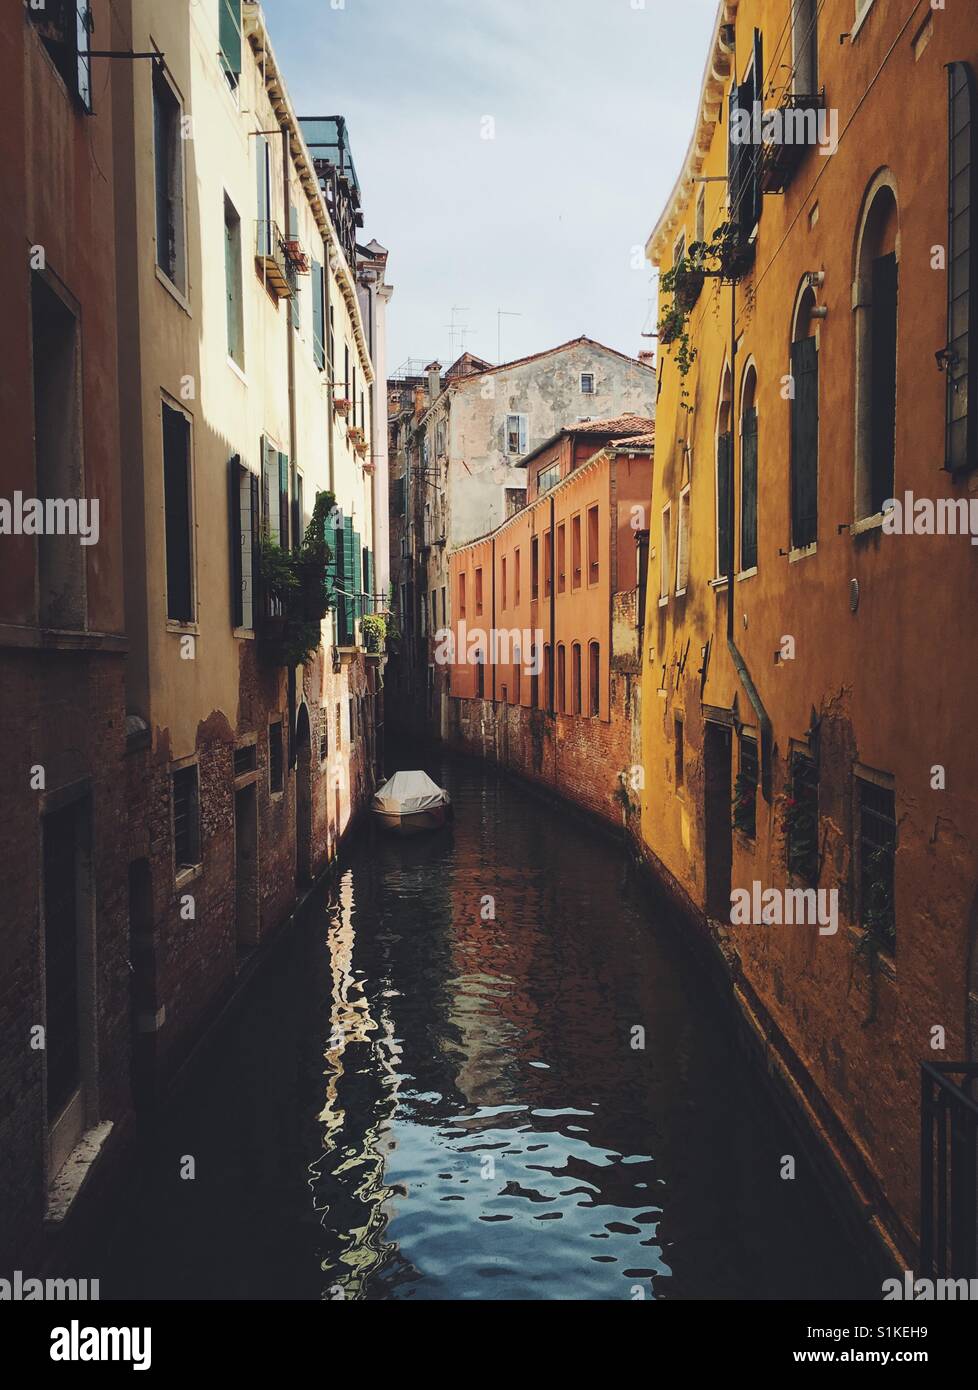 Boat parked in one of the side canals in Venice, Italy Stock Photo